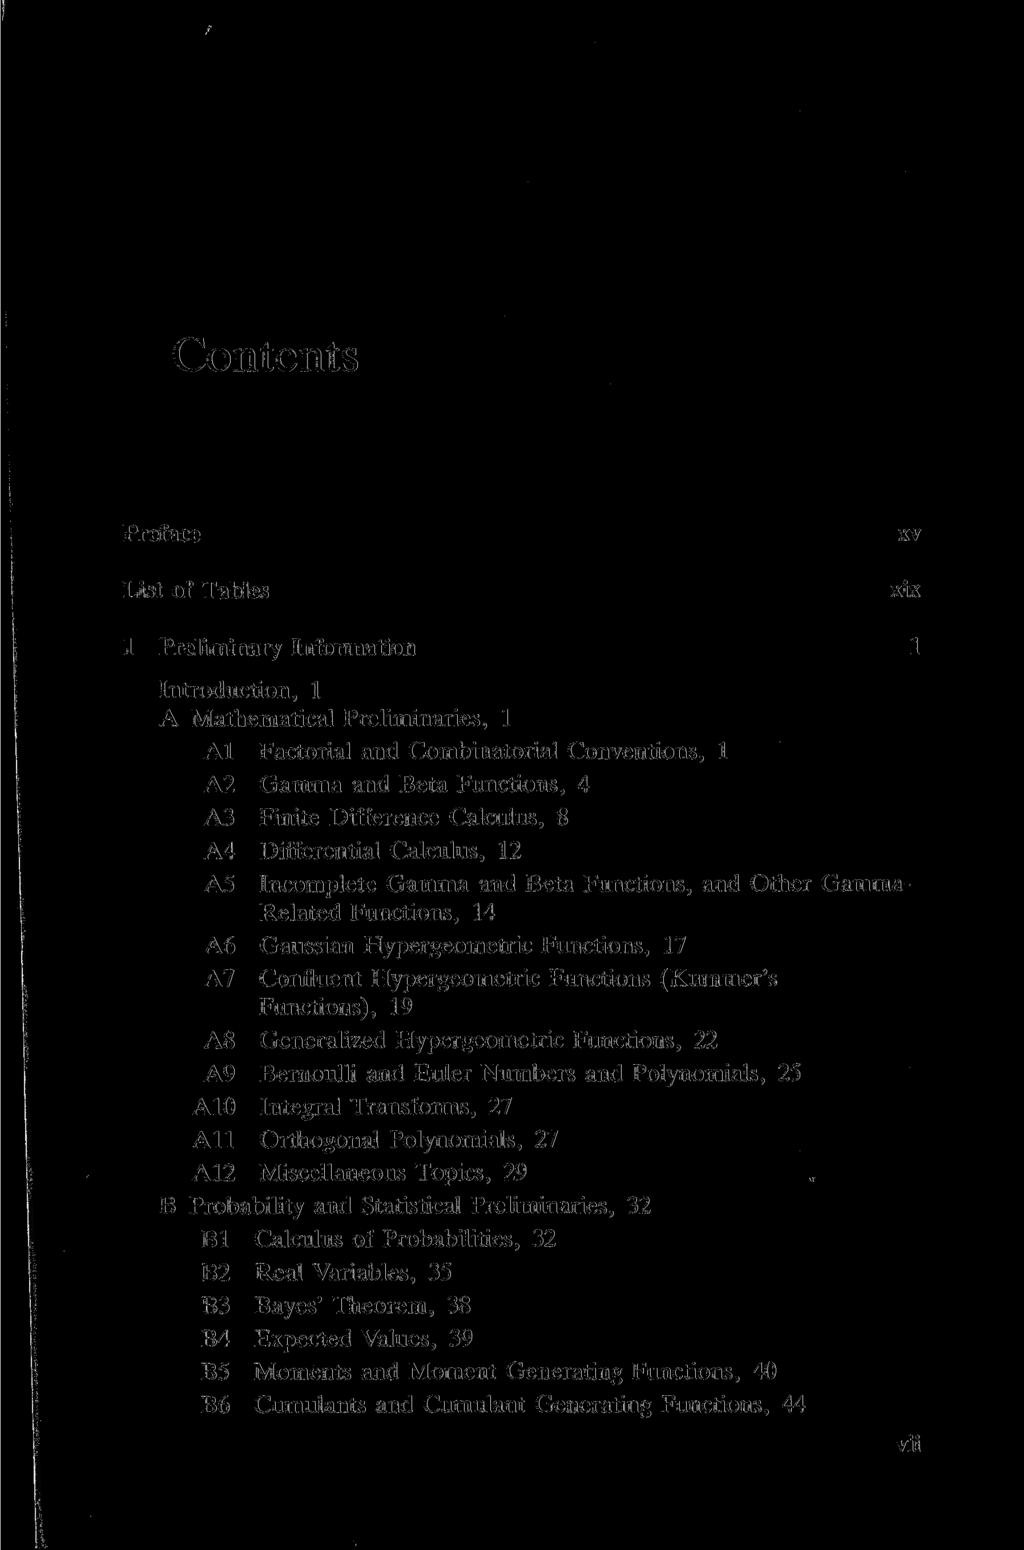 Contents Preface List of Tables xv xix 1 Preliminary Information 1 Introduction, 1 A Mathematical Preliminaries, 1 Al Factorial and Combinatorial Conventions, 1 A2 Gamma and Beta Functions, 4 A3